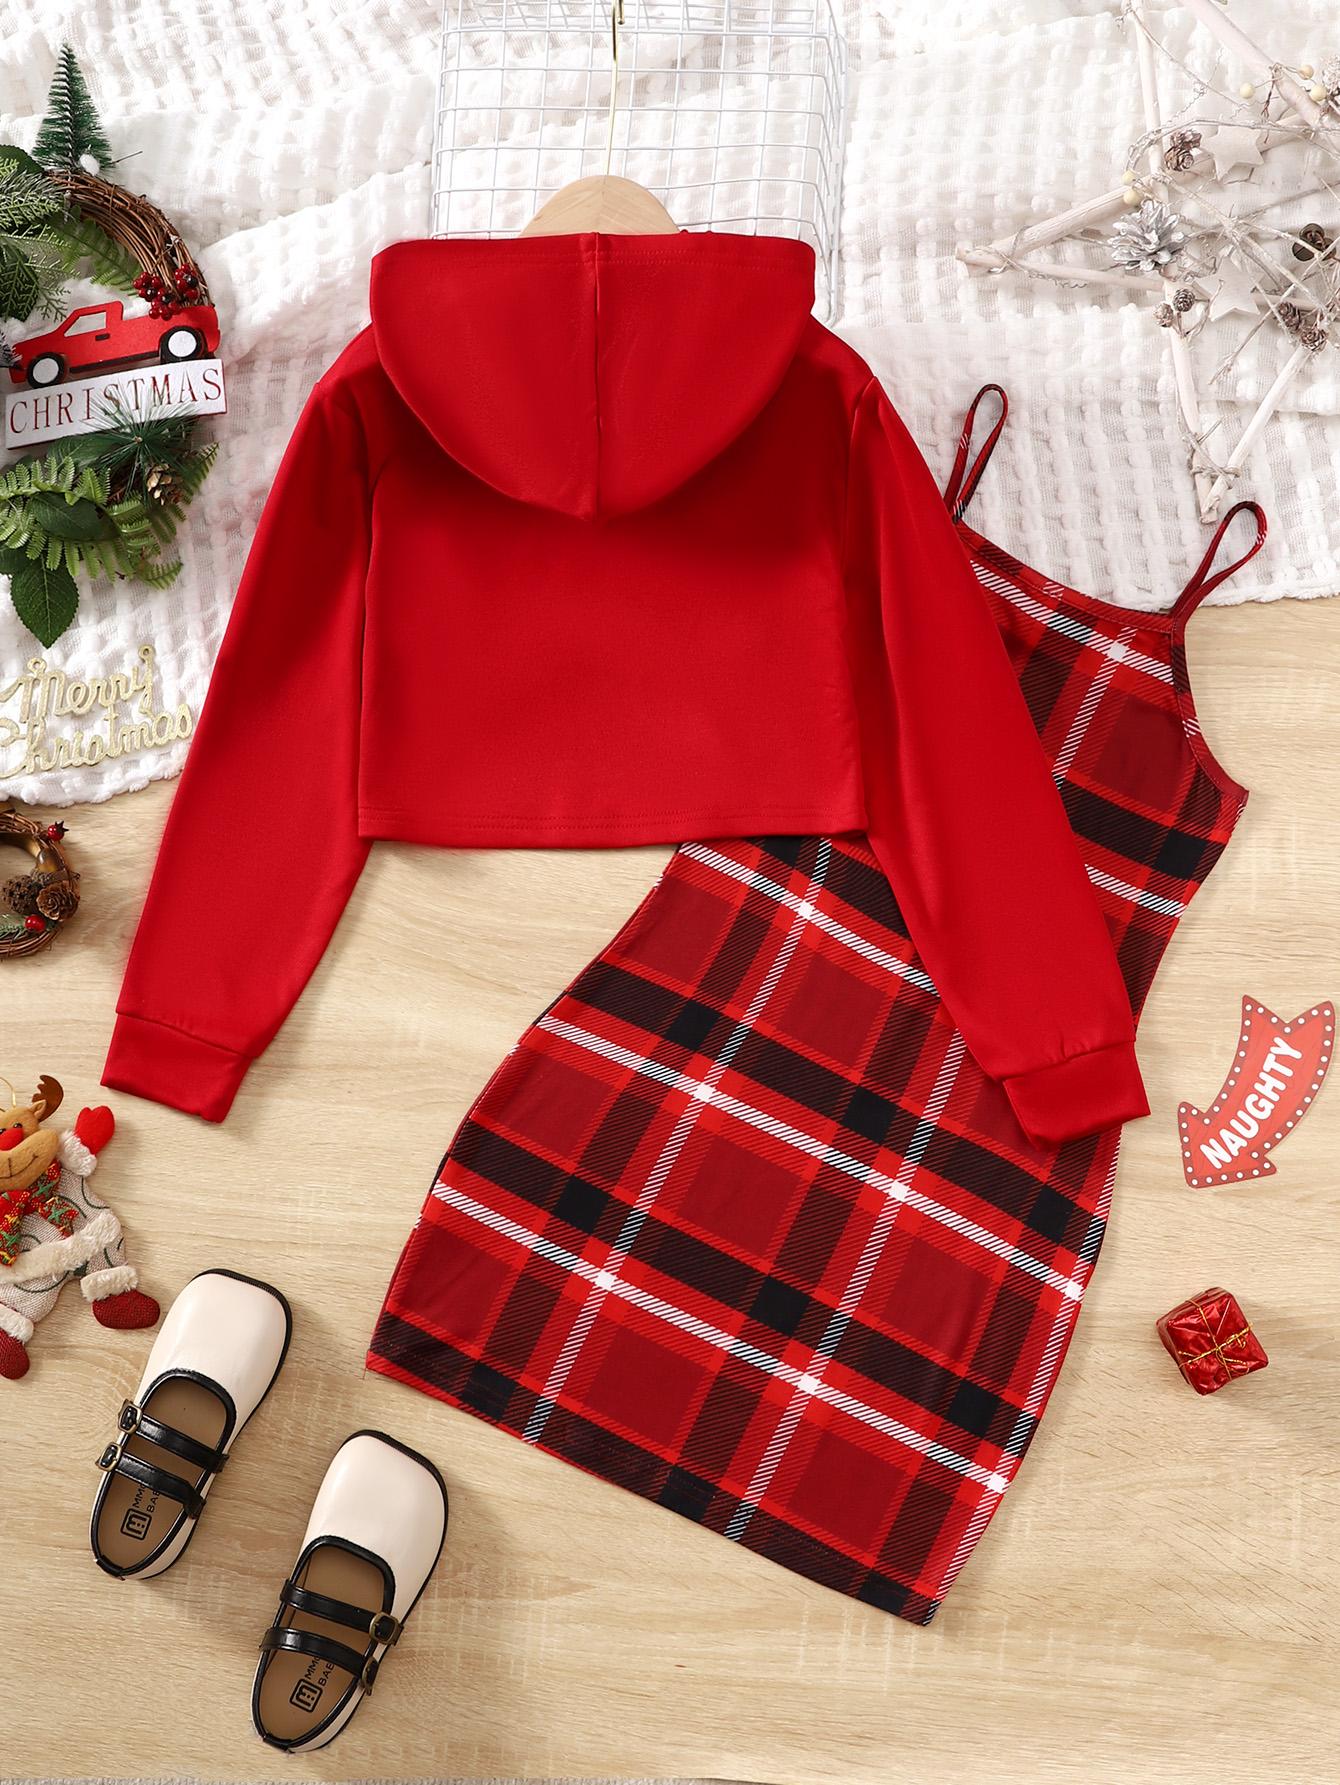 8-14Y  Ready Stock Kids Girls Christmas Outfits Straps Plaid Print Dress Print Letter Graphics Long Sleeve Sweater Hoodies 2Pcs Nice Apparel Clothes Set Red Catpapa 462307023